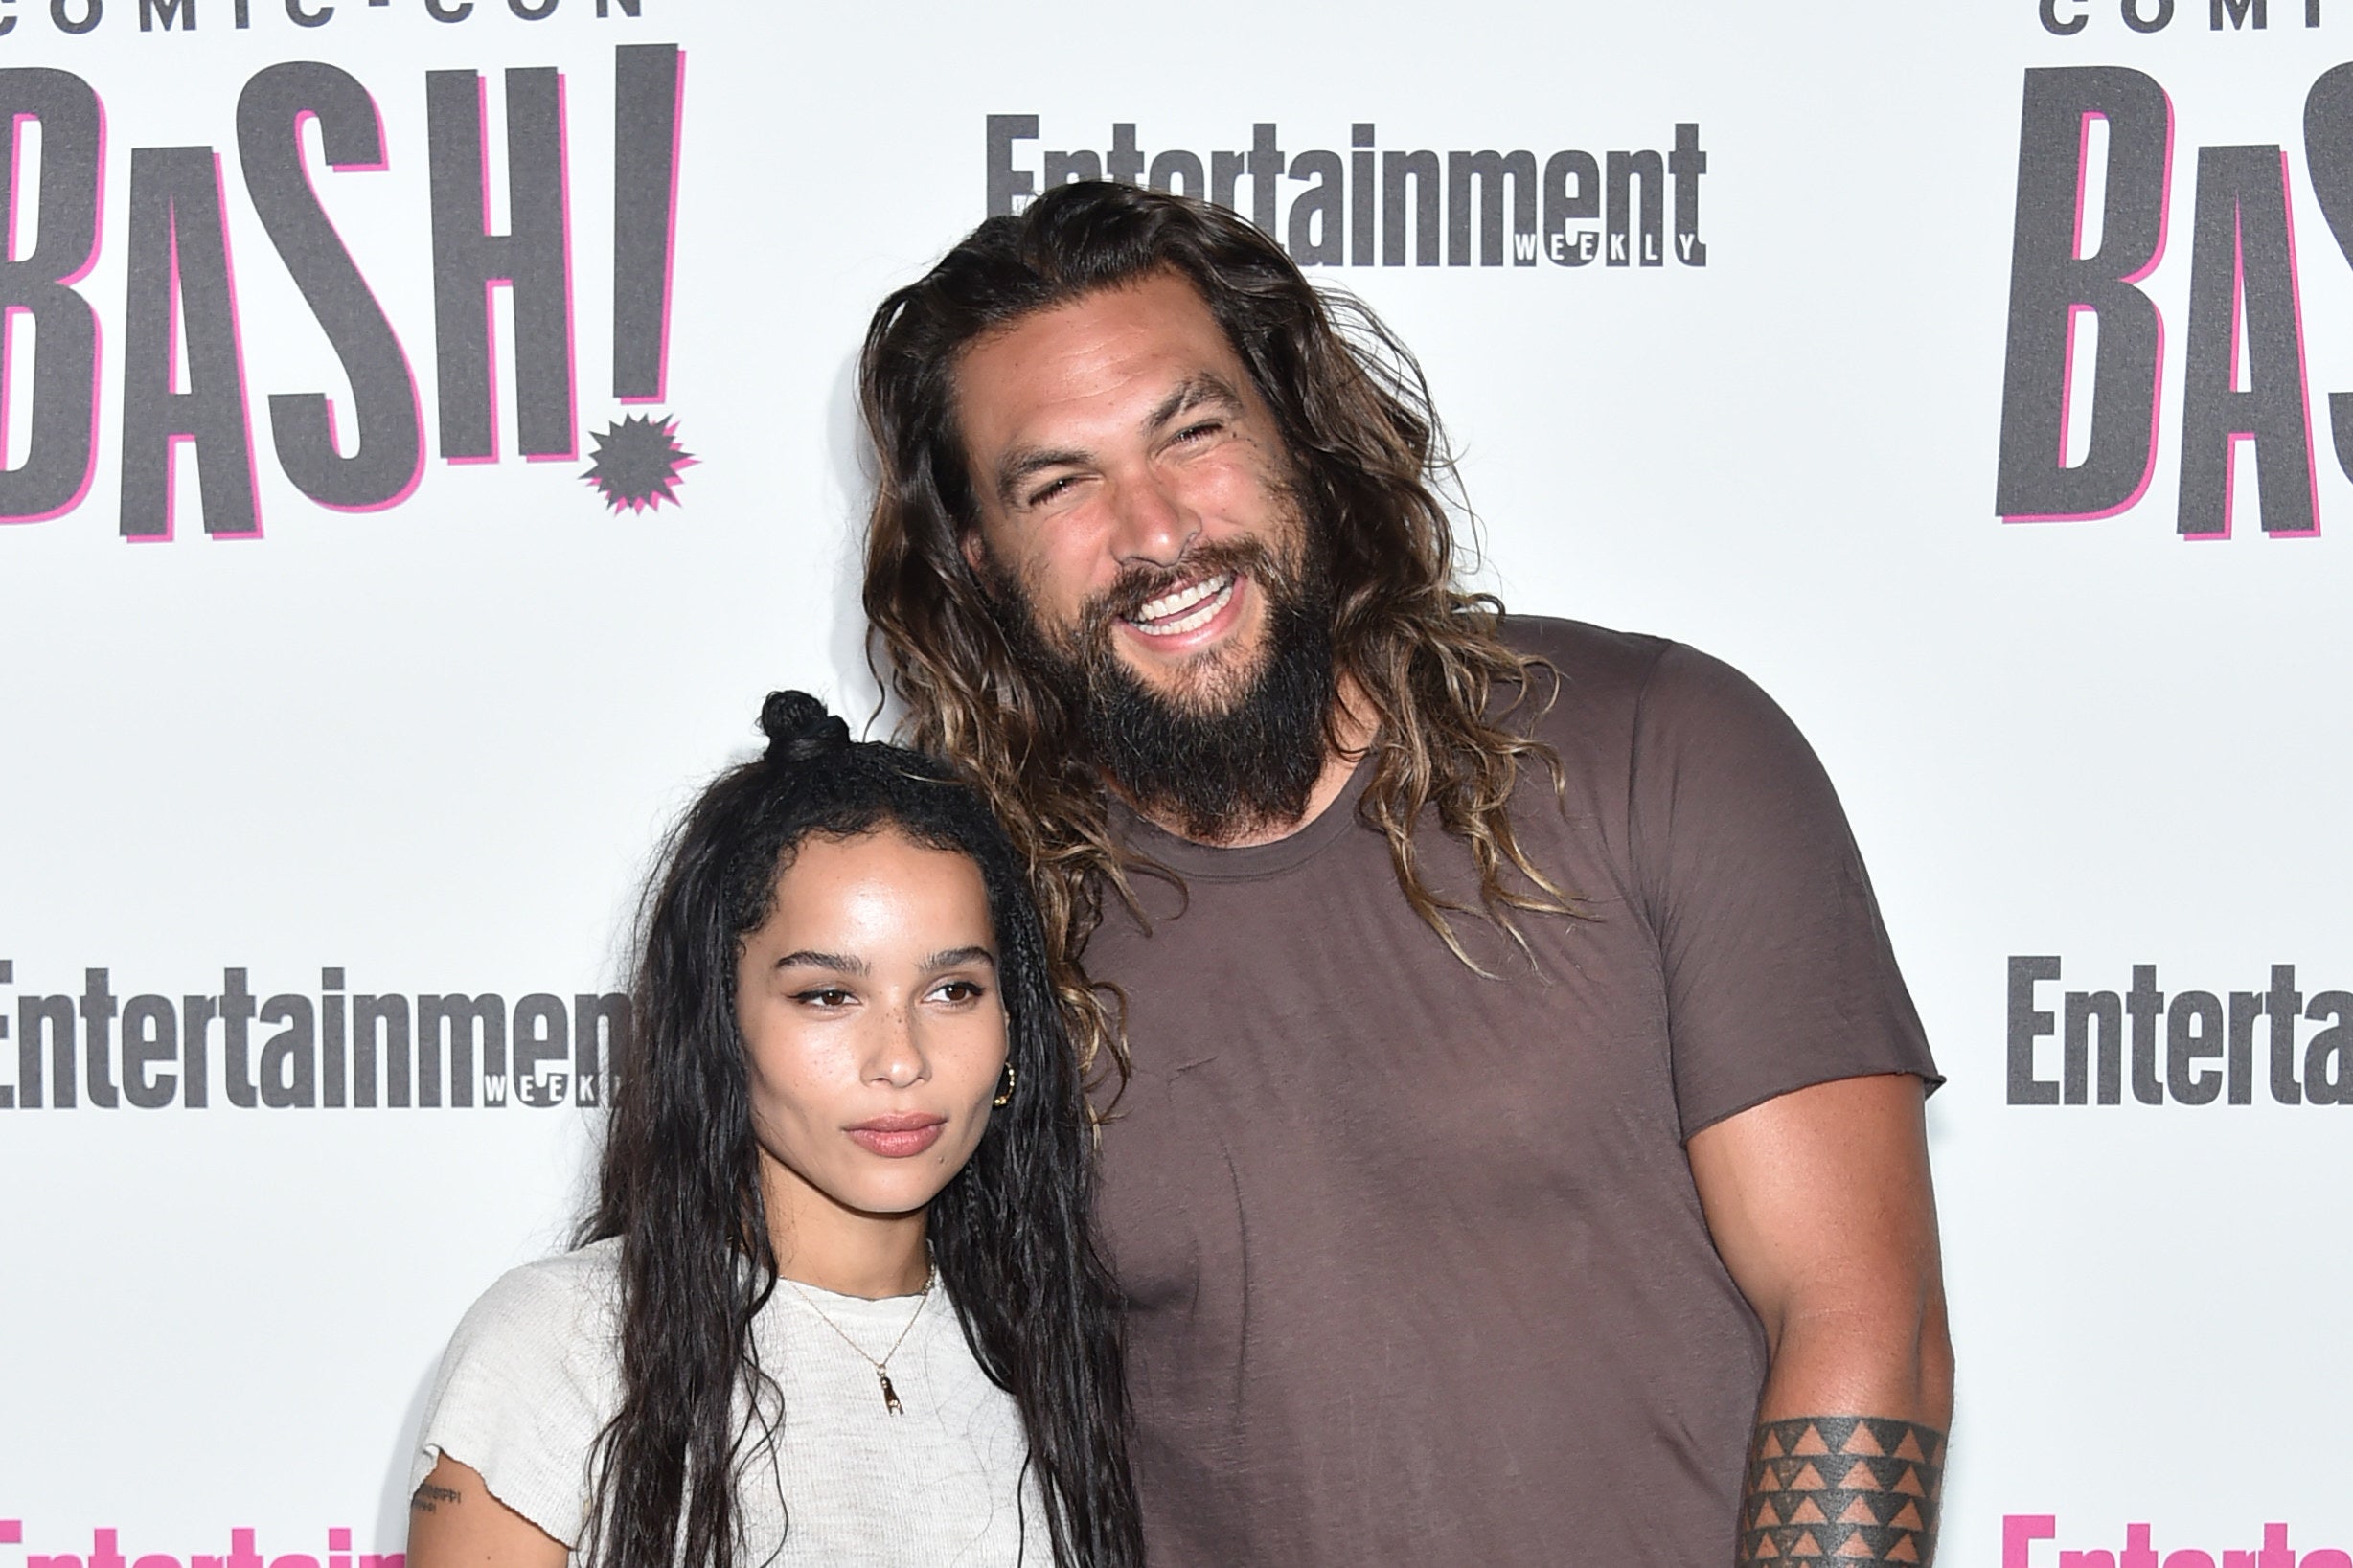 Jason Momoa And Zoë Kravitz Had A Cute Instagram Exchange, Two Weeks After Jason And Lisa Bonet Announced Their Split